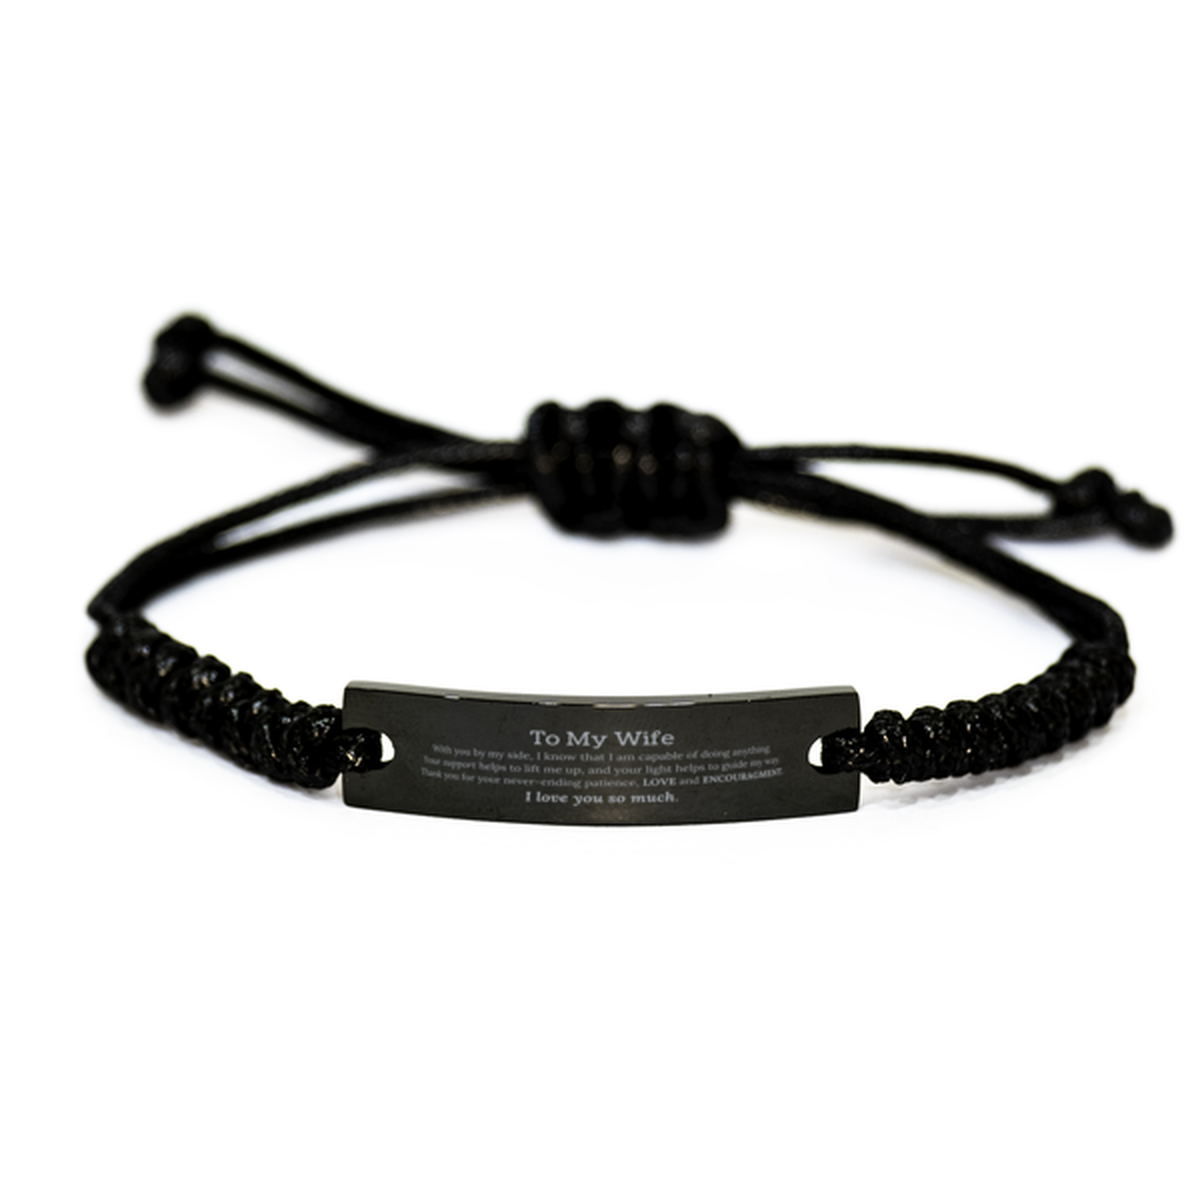 Appreciation Wife Black Rope Bracelet Gifts, To My Wife Birthday Christmas Wedding Keepsake Gifts for Wife With you by my side, I know that I am capable of doing anything. I love you so much